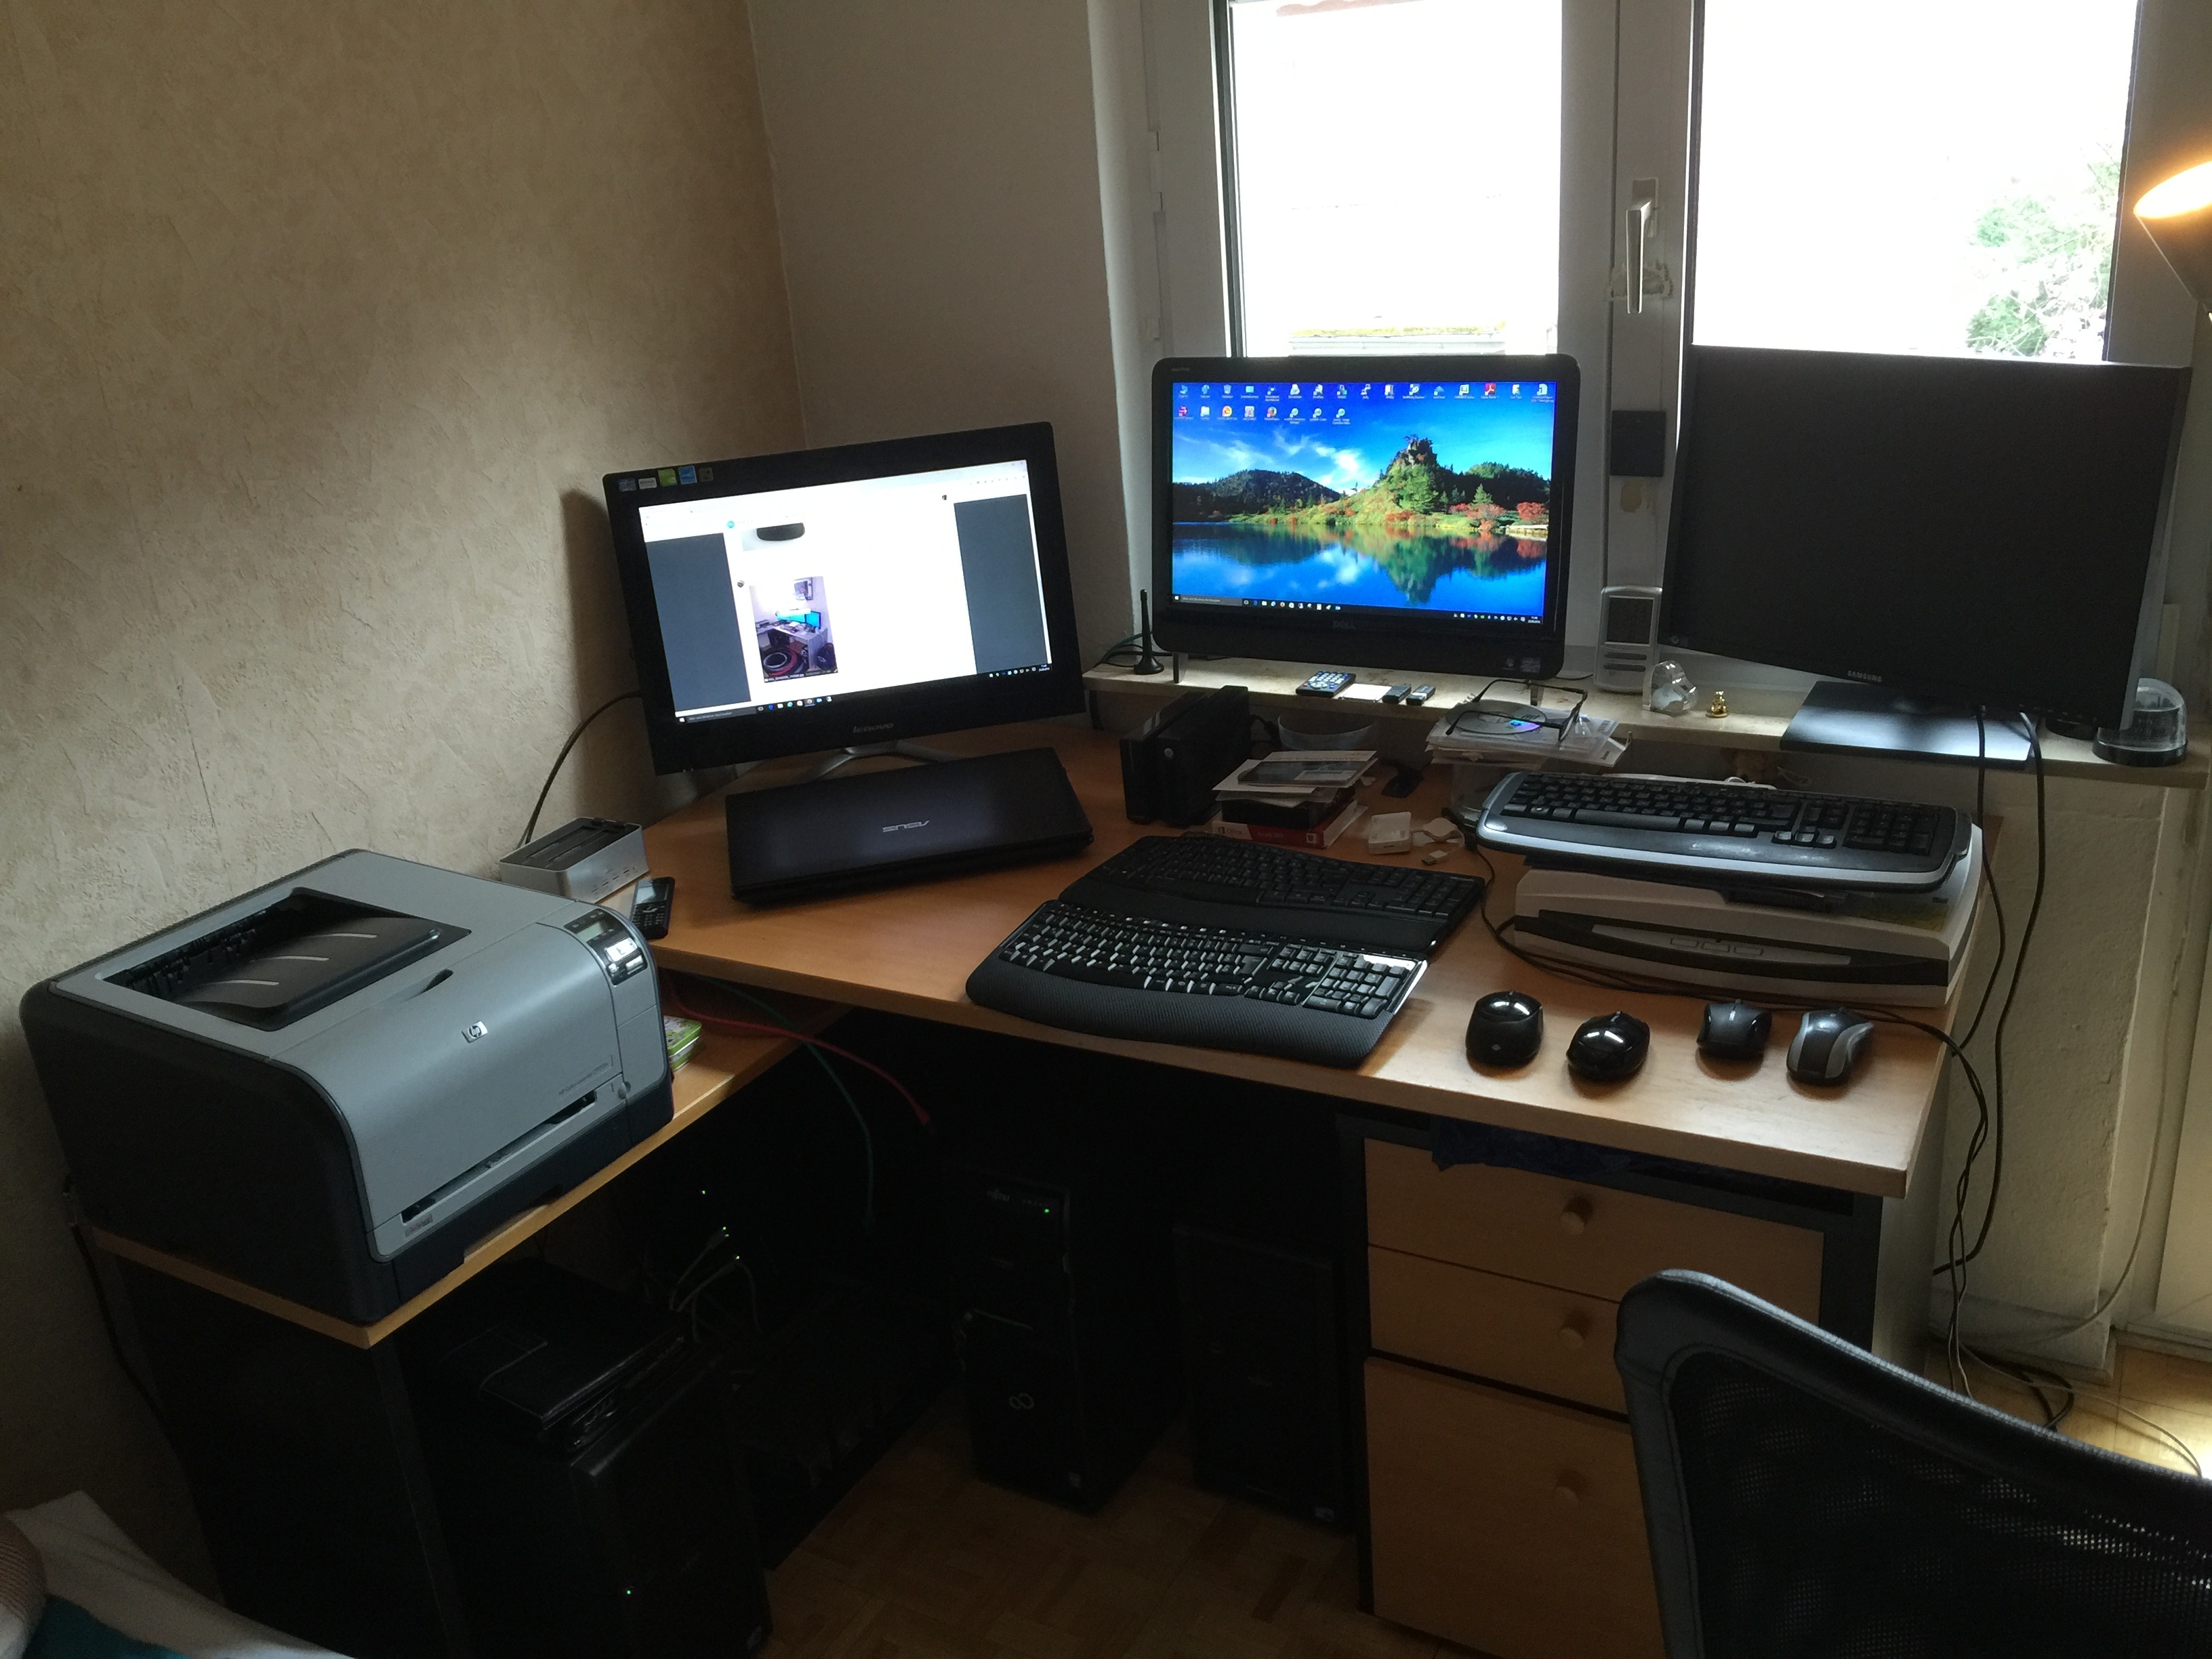 Share a photo of your work/home setup - Chat - NethServer Community